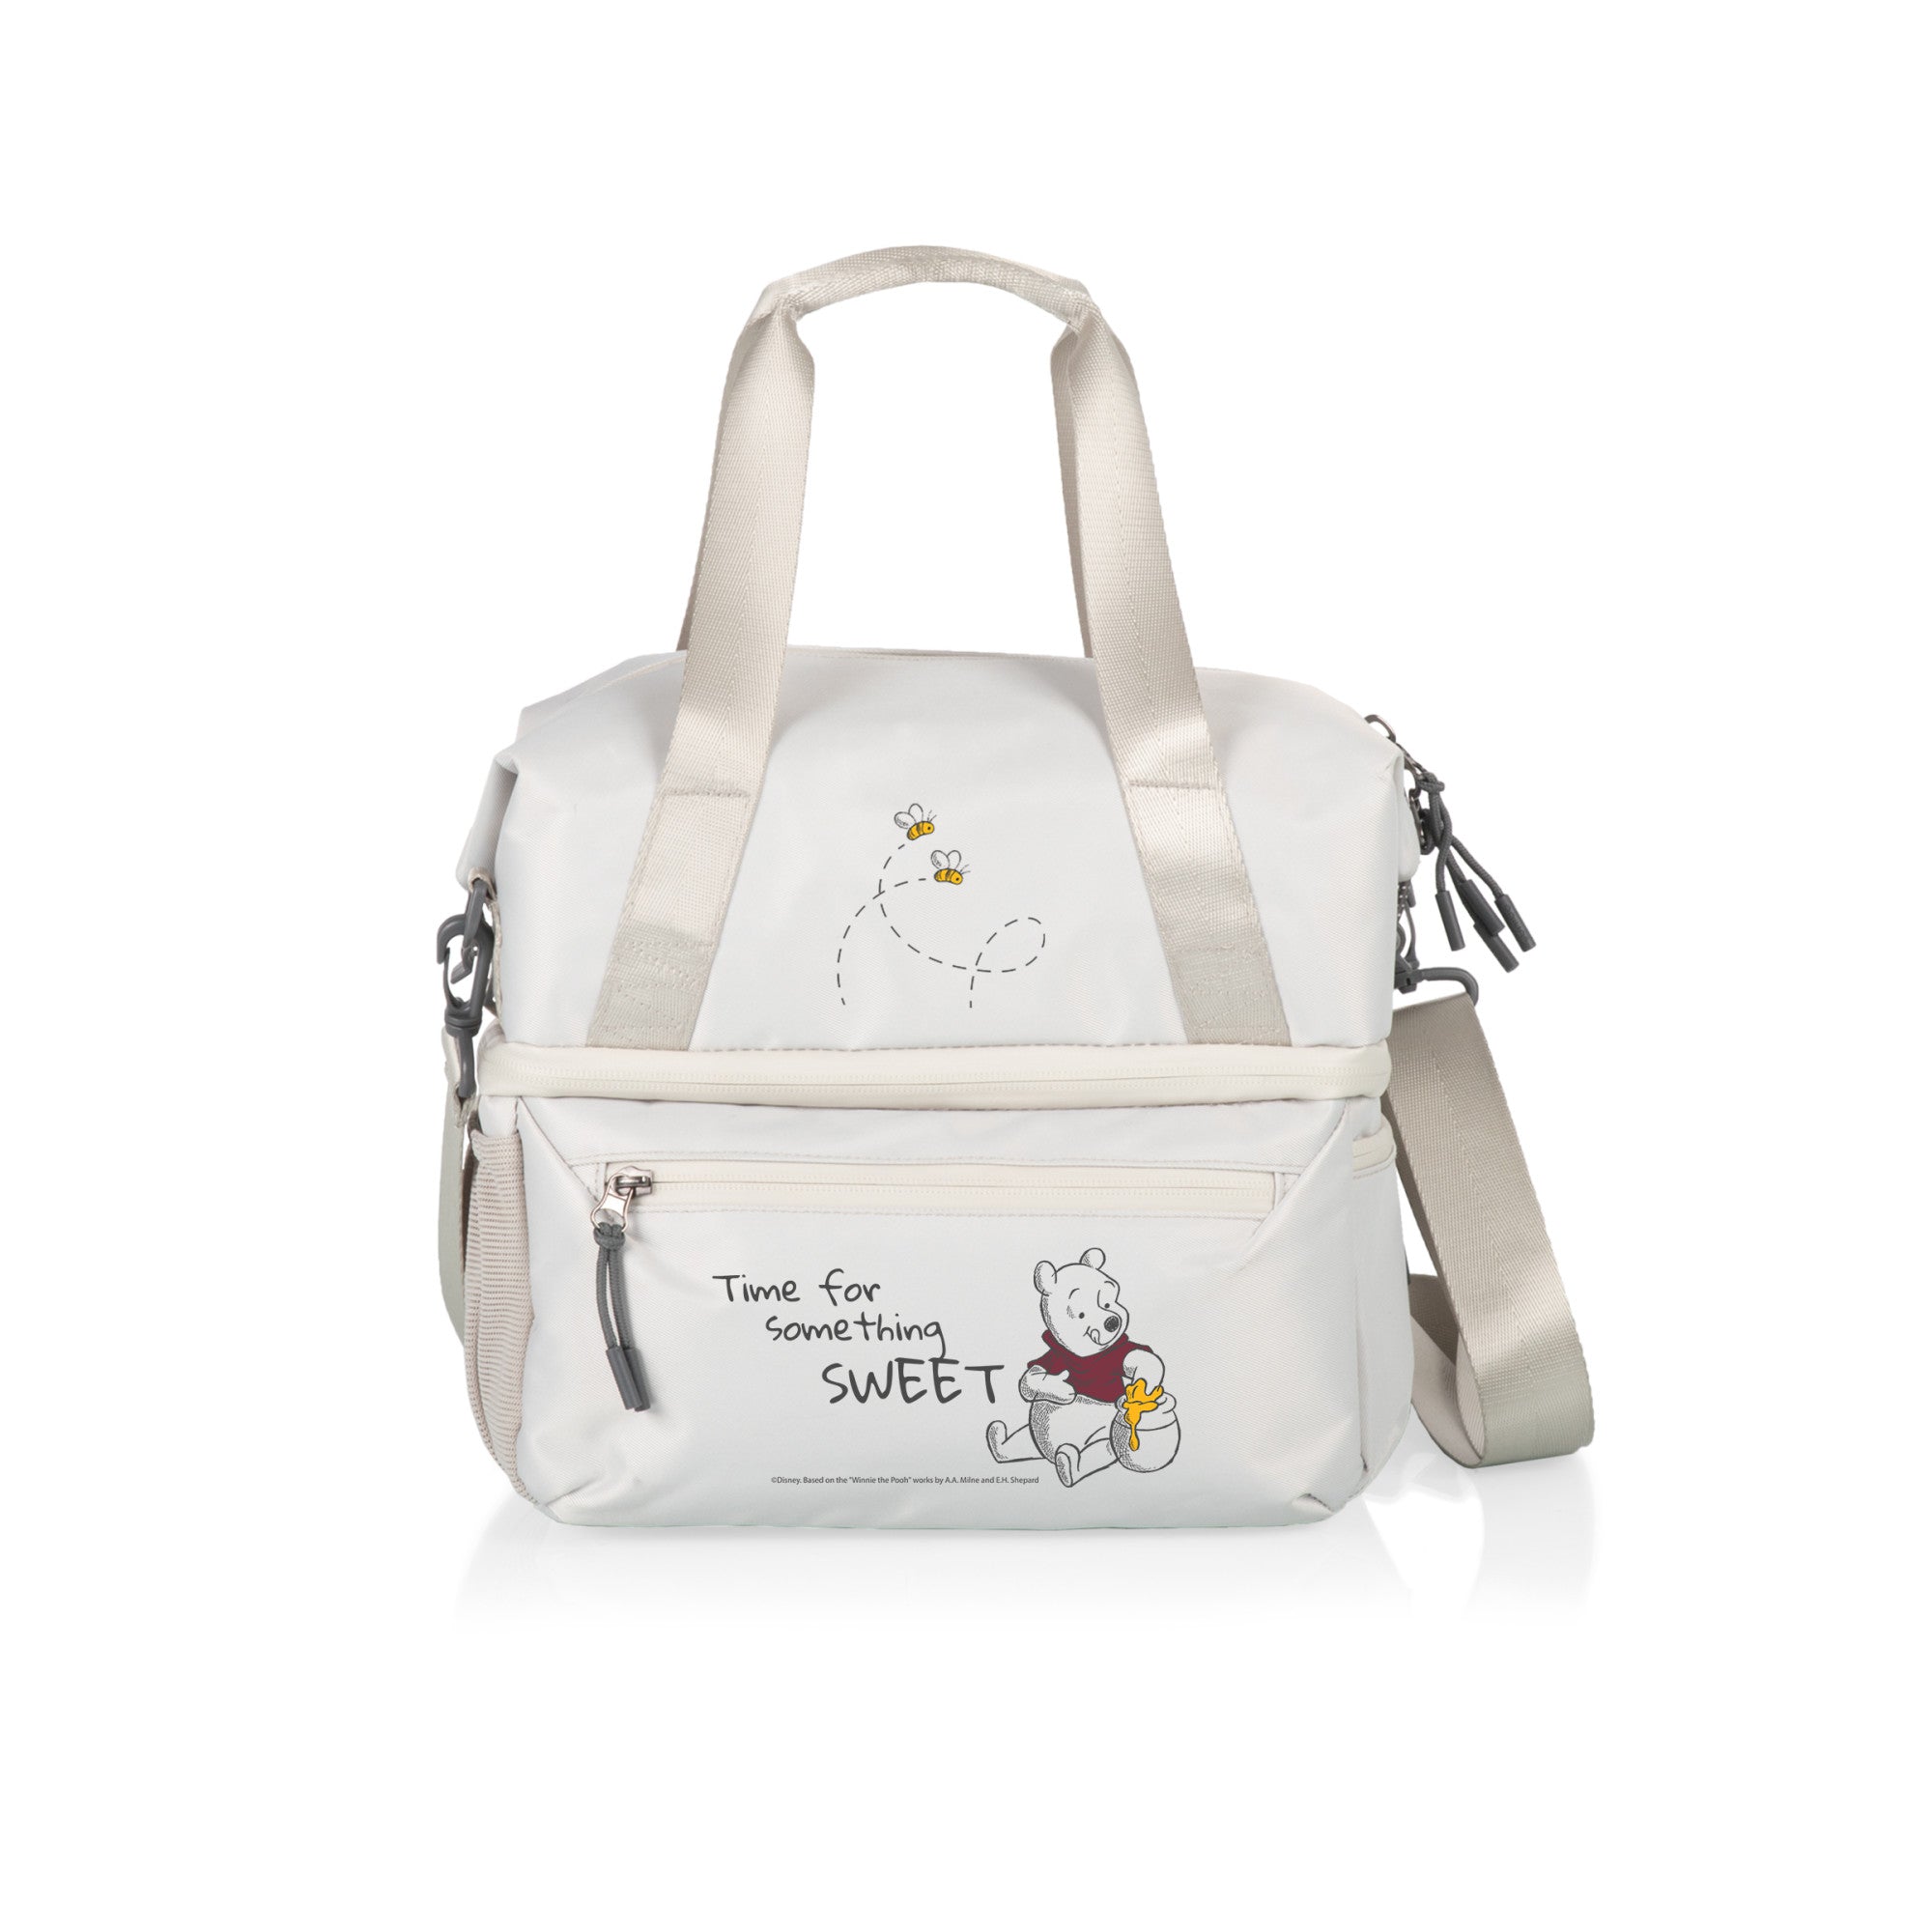 Winnie the Pooh - Tarana Lunch Bag Cooler with Utensils